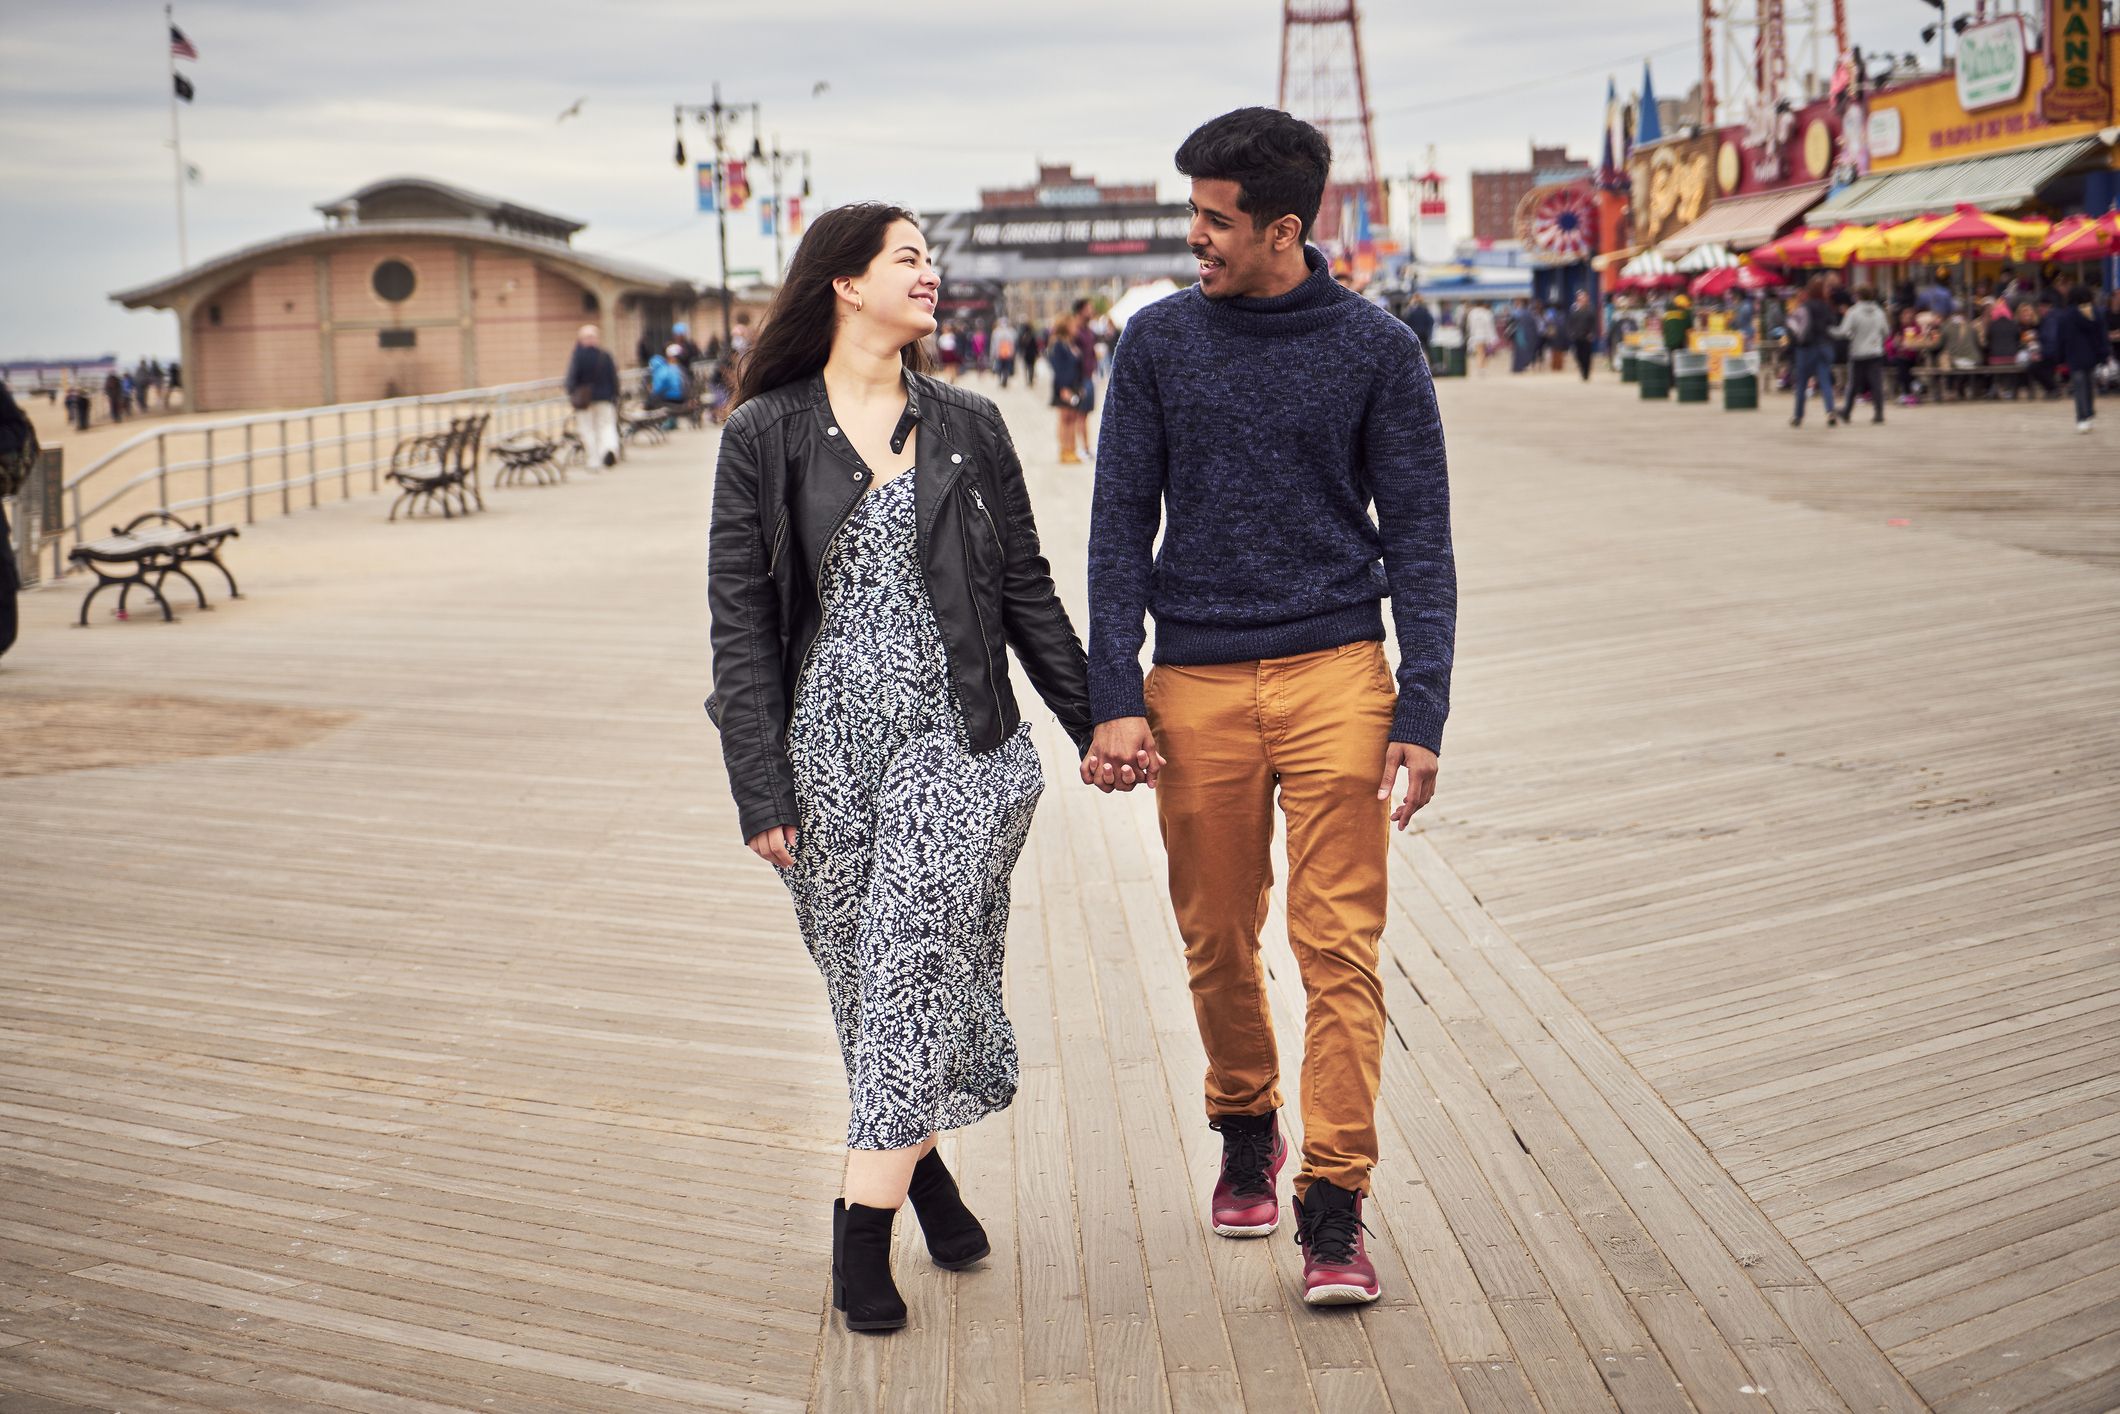 11 First Date Tips From Experts Thatll Help You Land Another